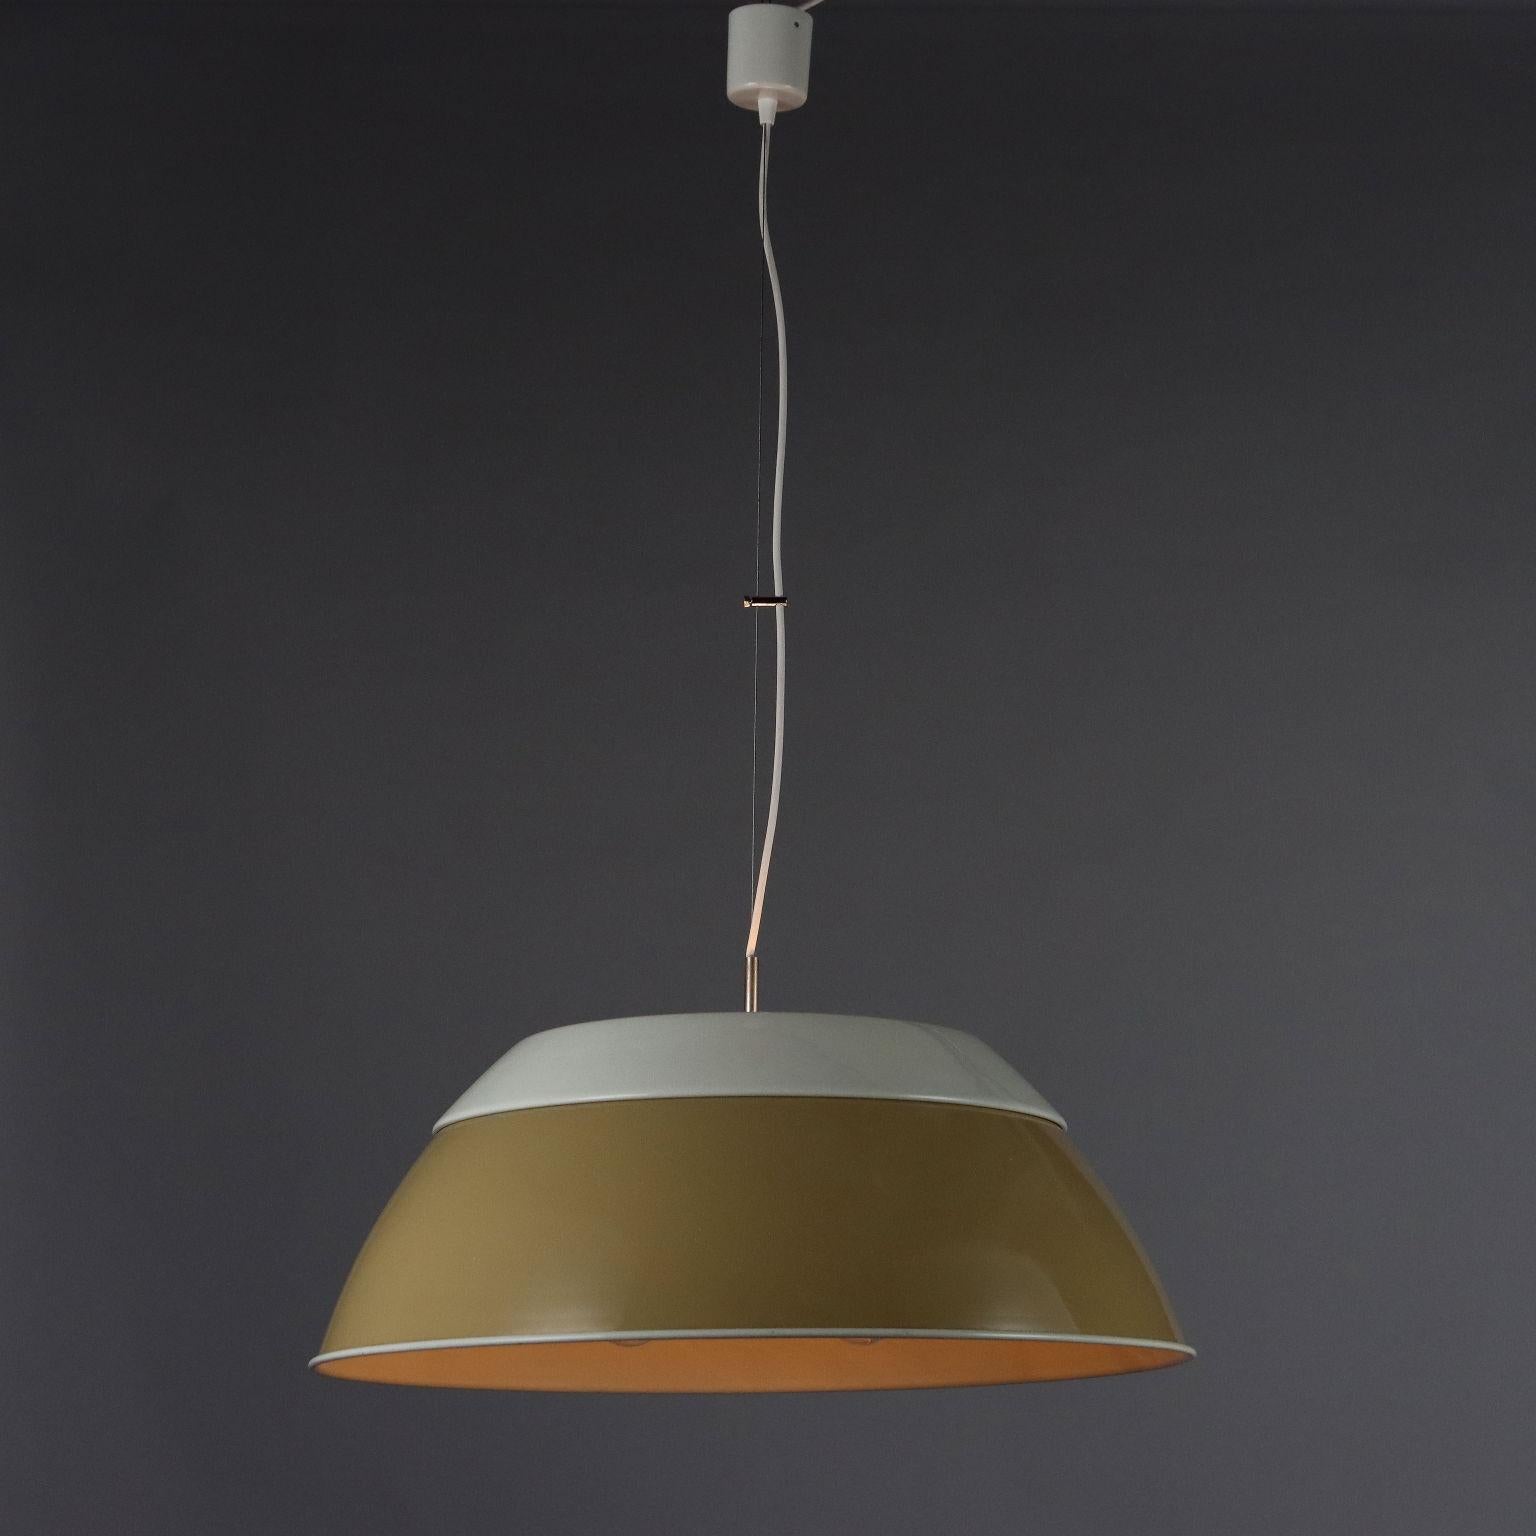 Ceiling lamp, with upper and lower dual ignition in enameled aluminum. 